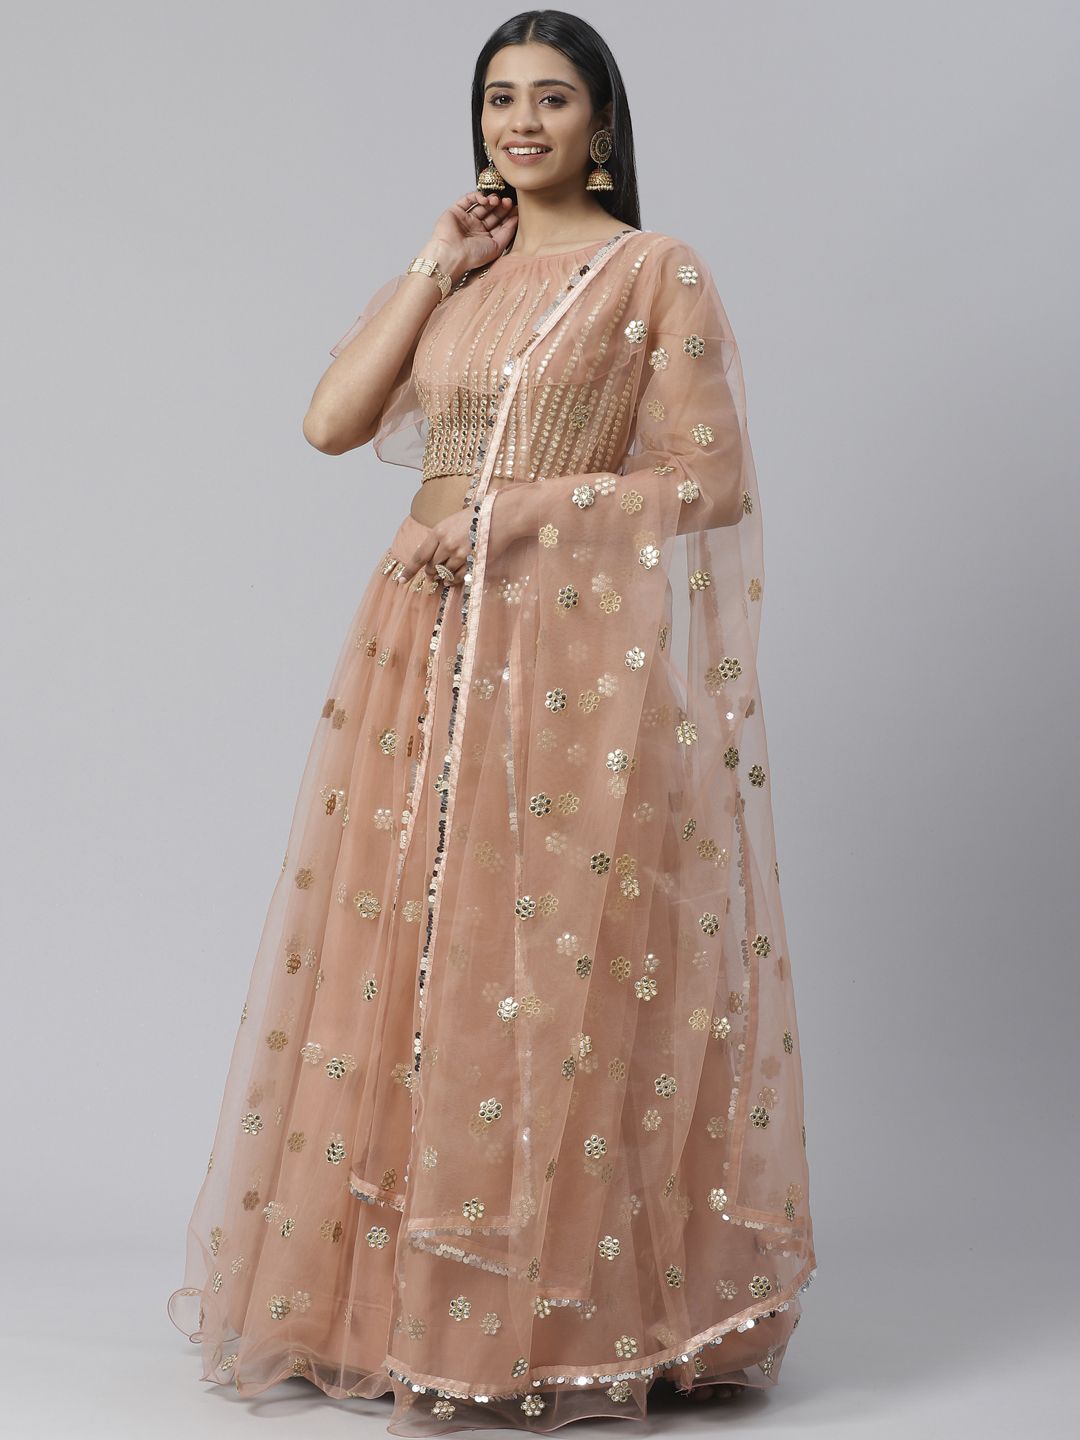 SHOPGARB Peach-Coloured & Silver-Toned Embroidered Semi-Stitched Lehenga & Unstitched Blouse with Dupatta Price in India